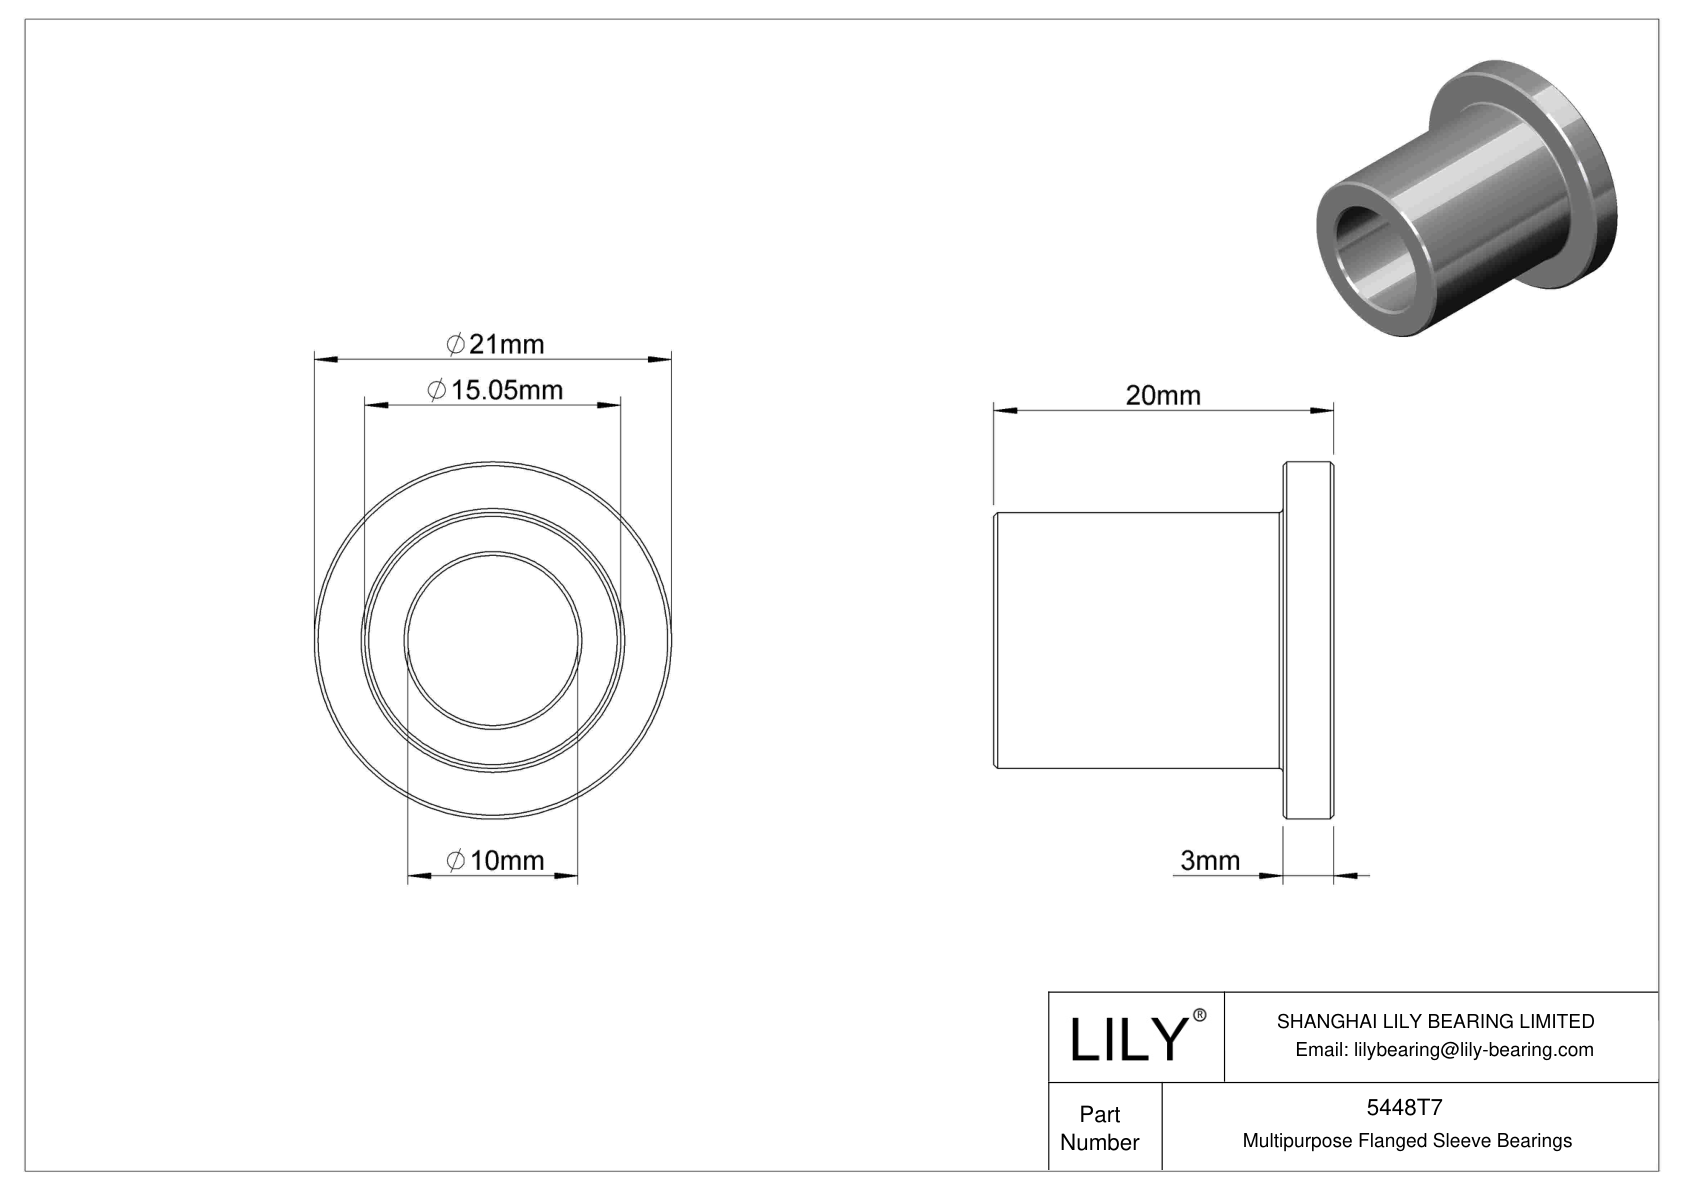 FEEITH Multipurpose Flanged Sleeve Bearings cad drawing